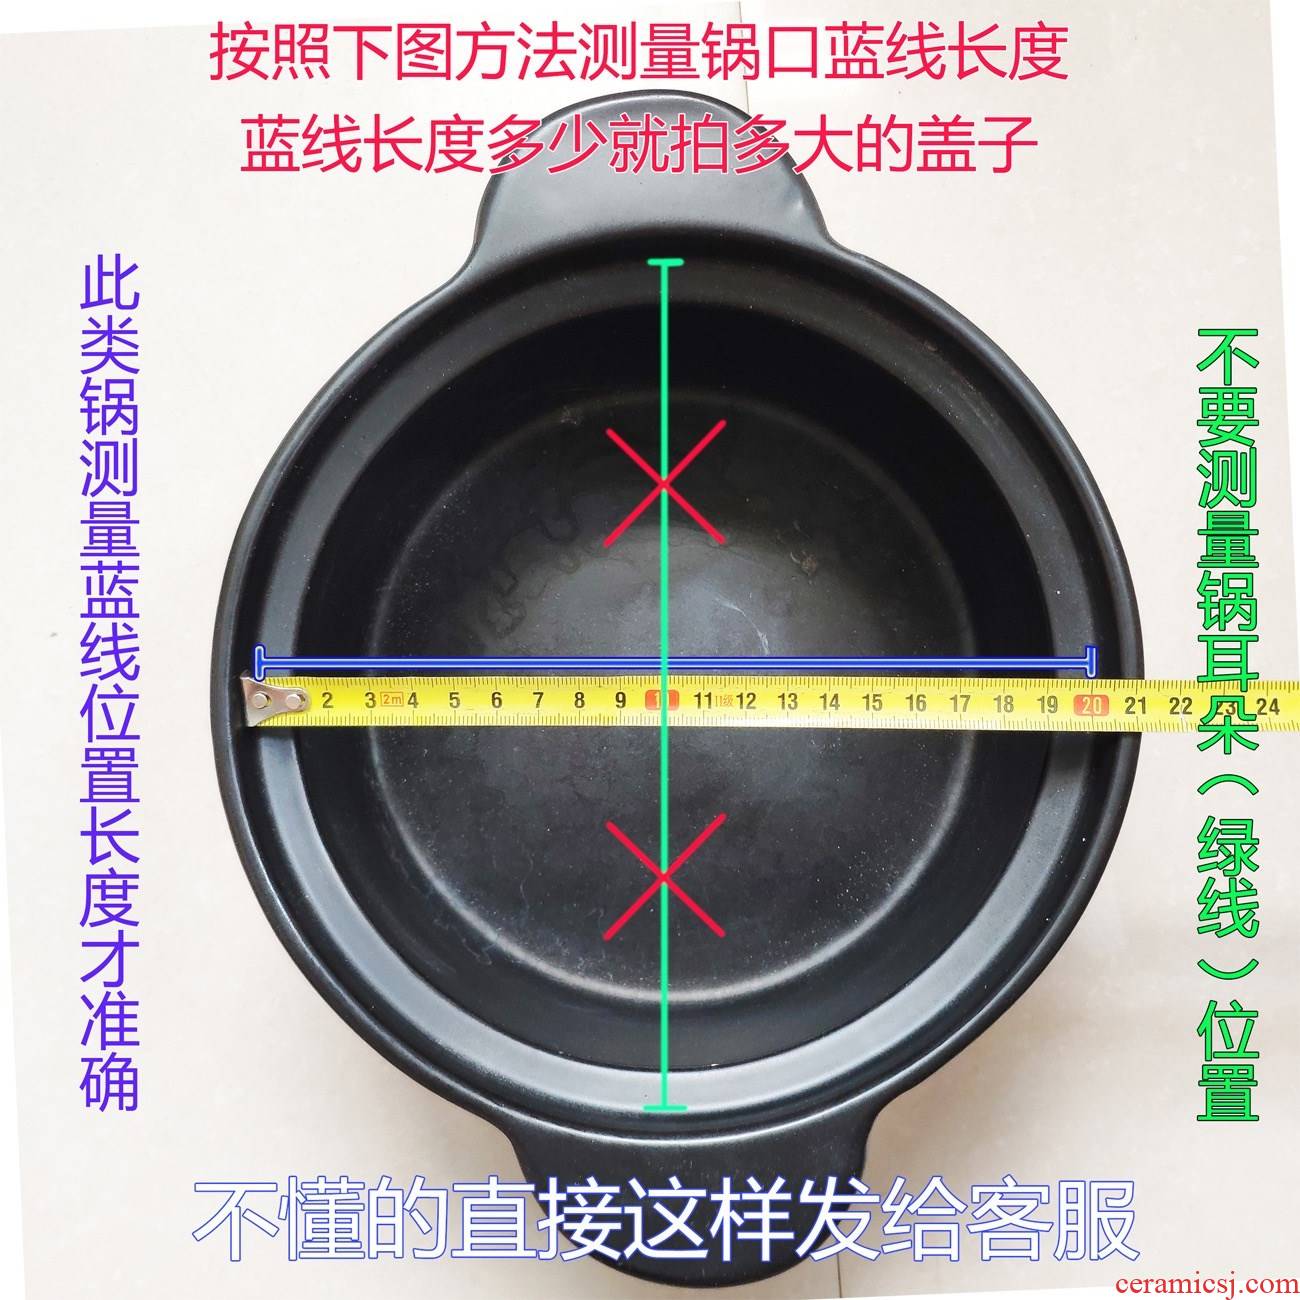 Ceramic casserole single cover black and white porcelain clay pot gm accessories stew casserole lid household circular medicine pot cover